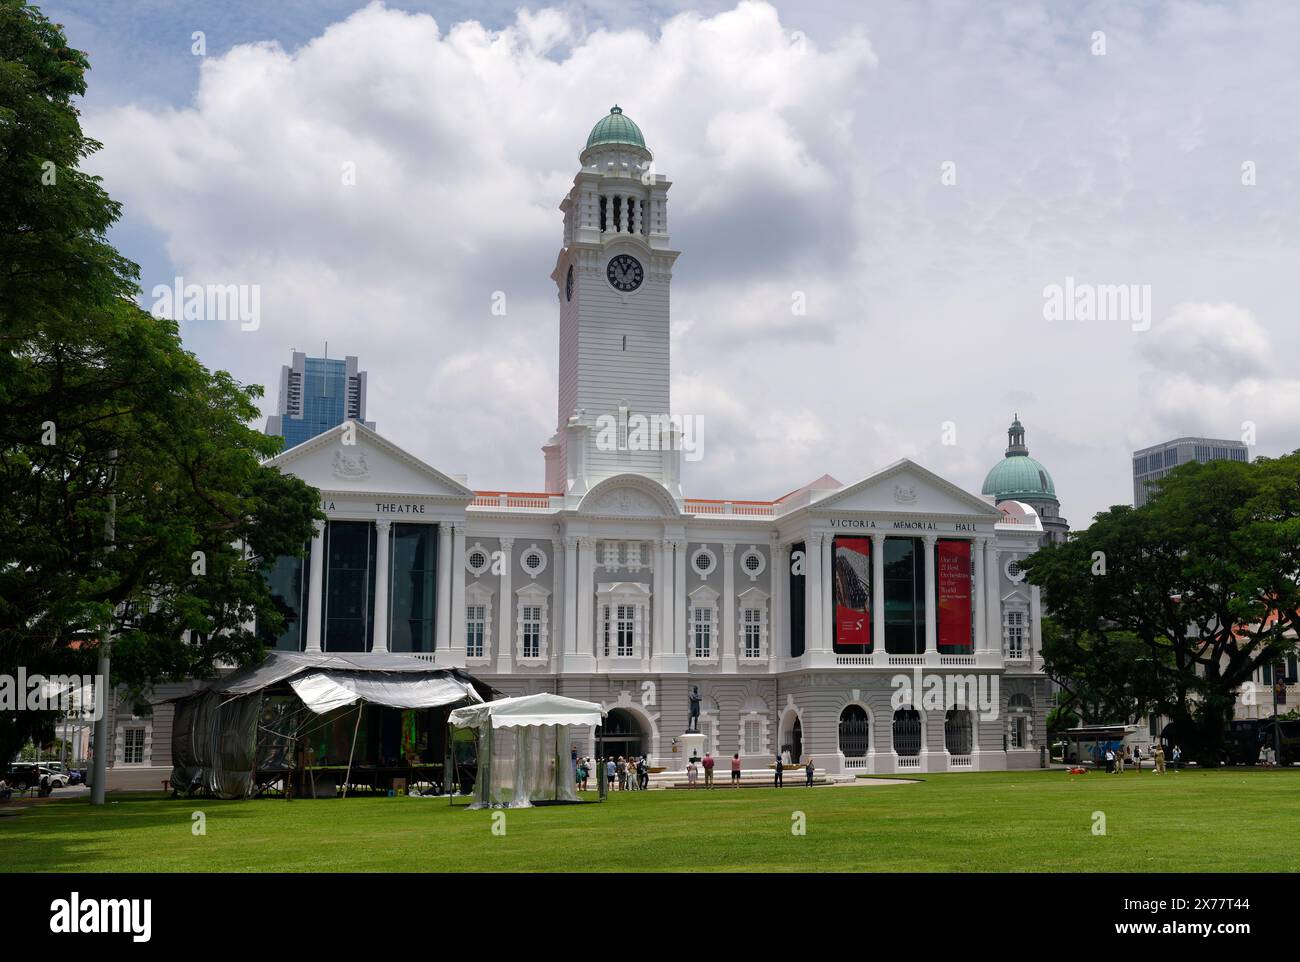 The Victoria Theatre, clock tower and statue of Sir Stamford Raffles, Singapore, Asia Stock Photo